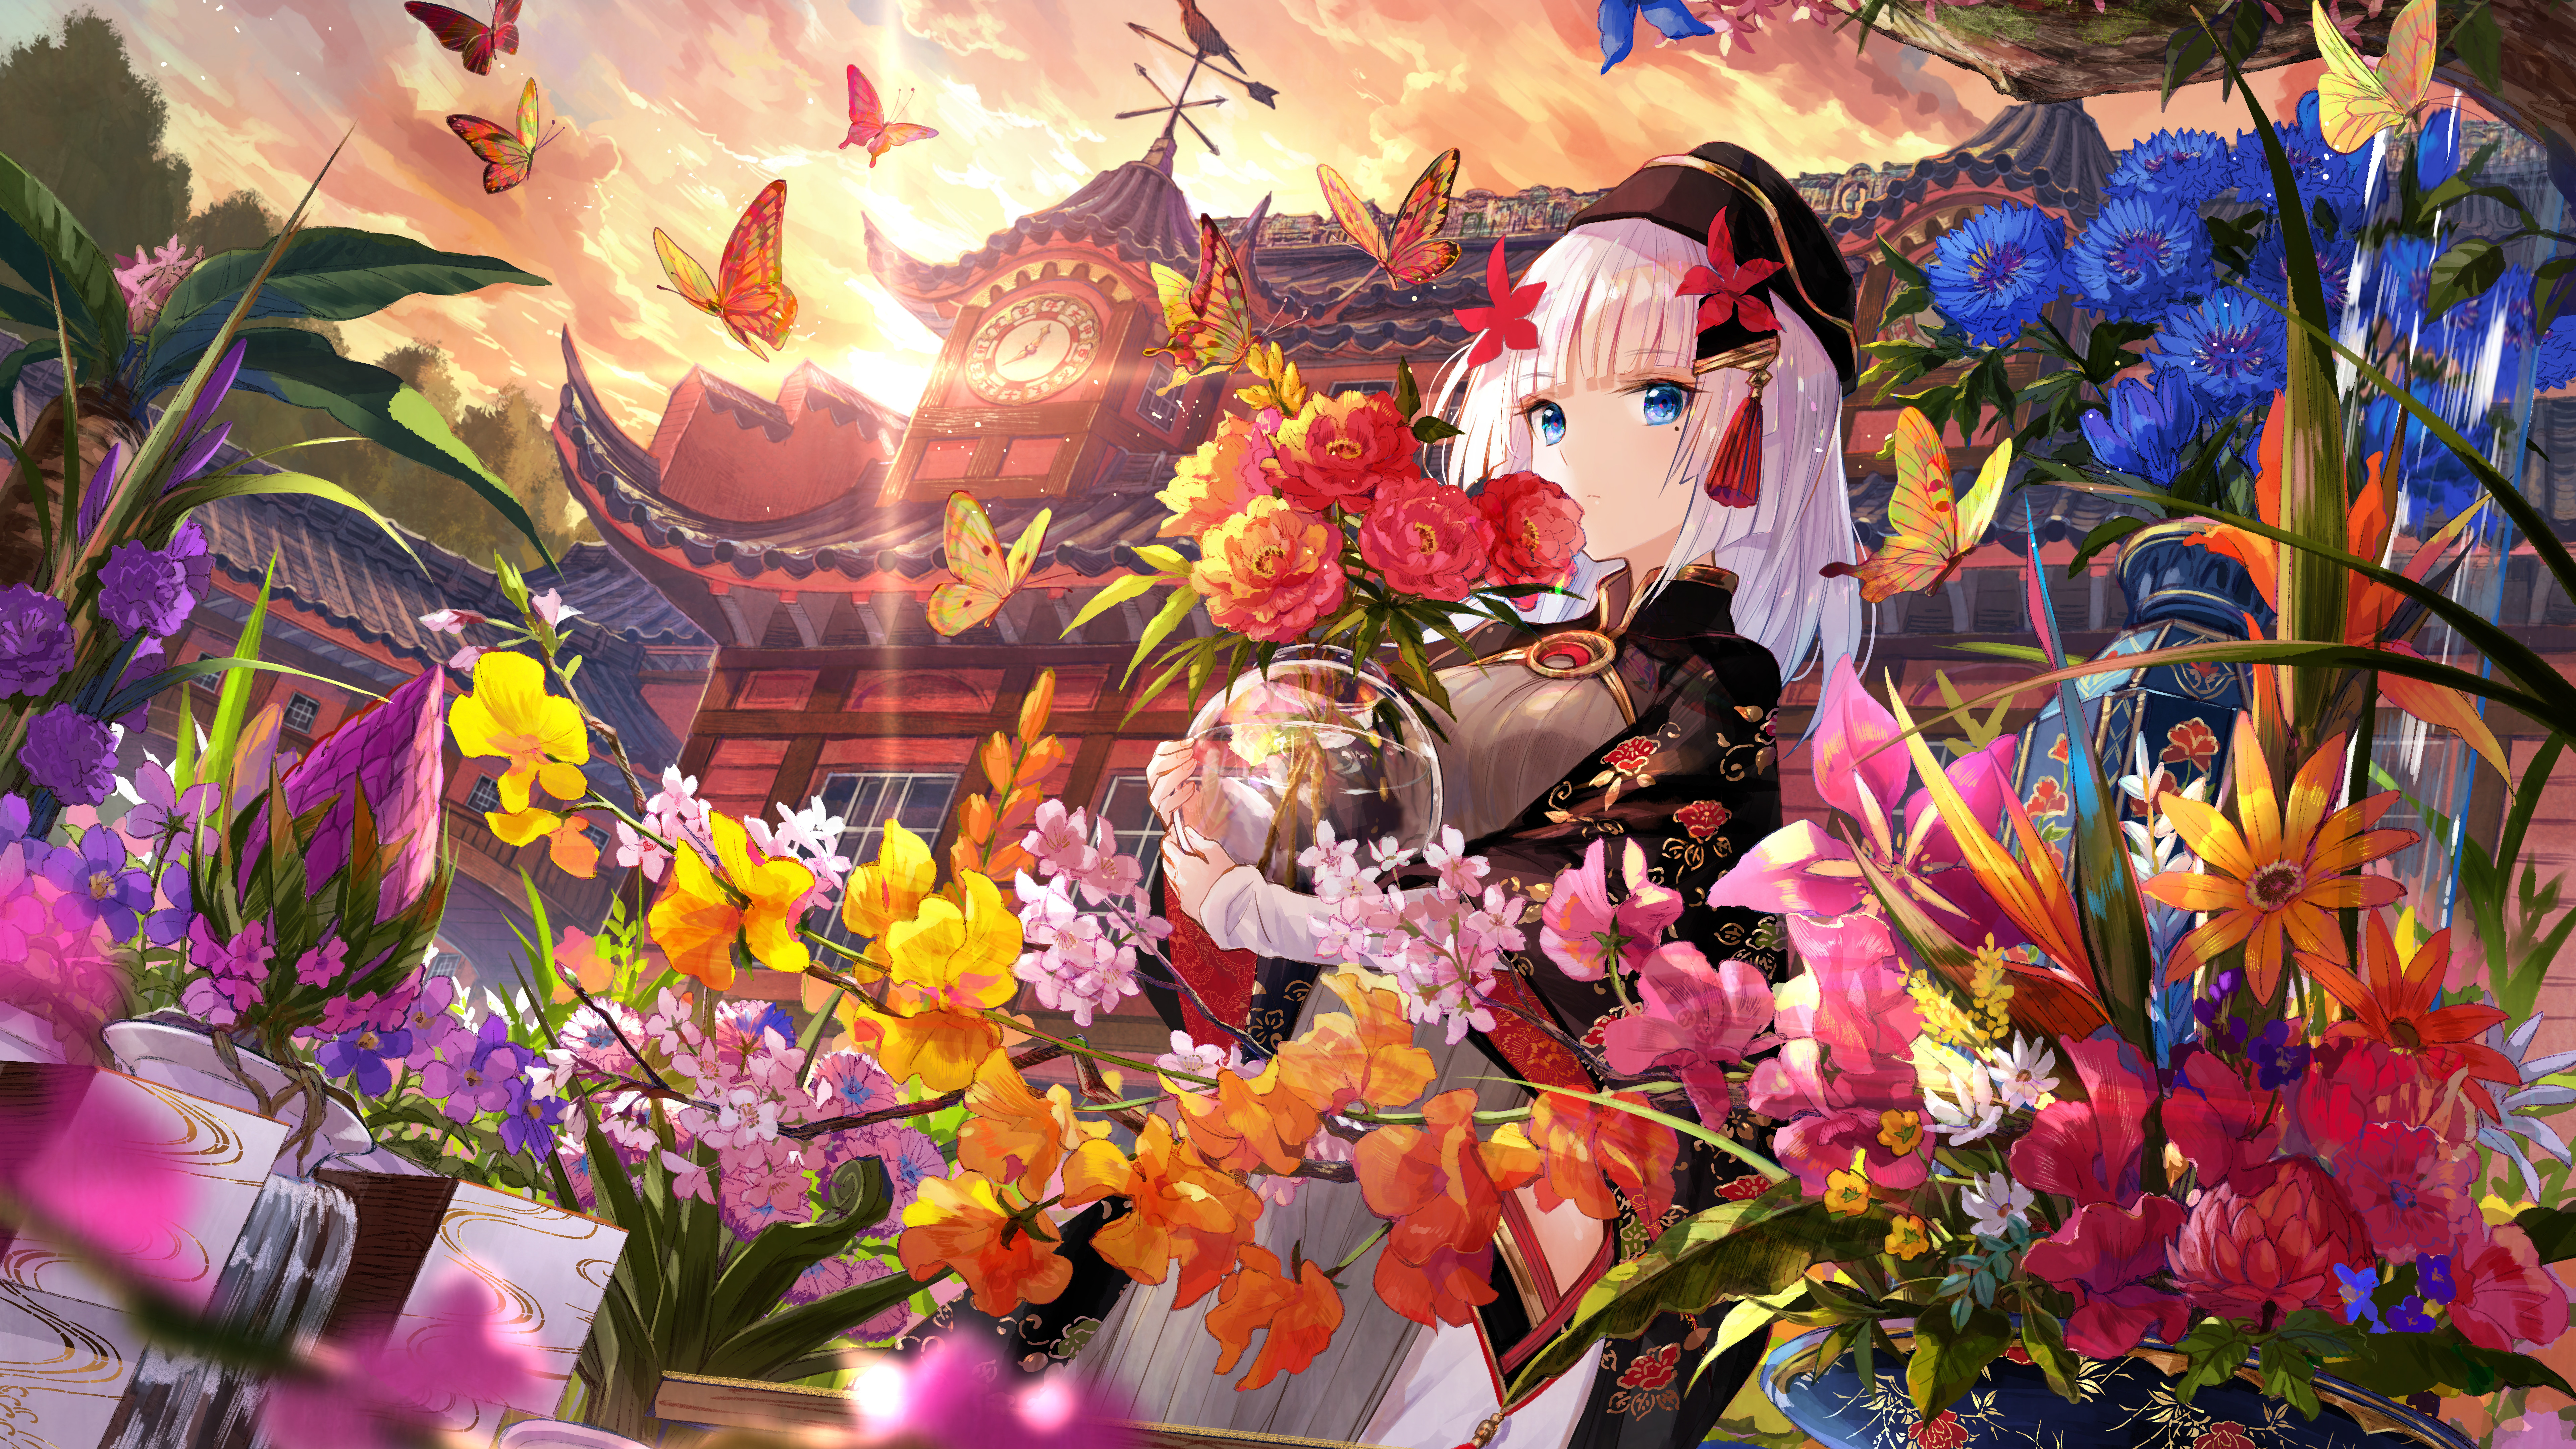 Anime 7680x4320 anime girls flowers butterfly rose plants